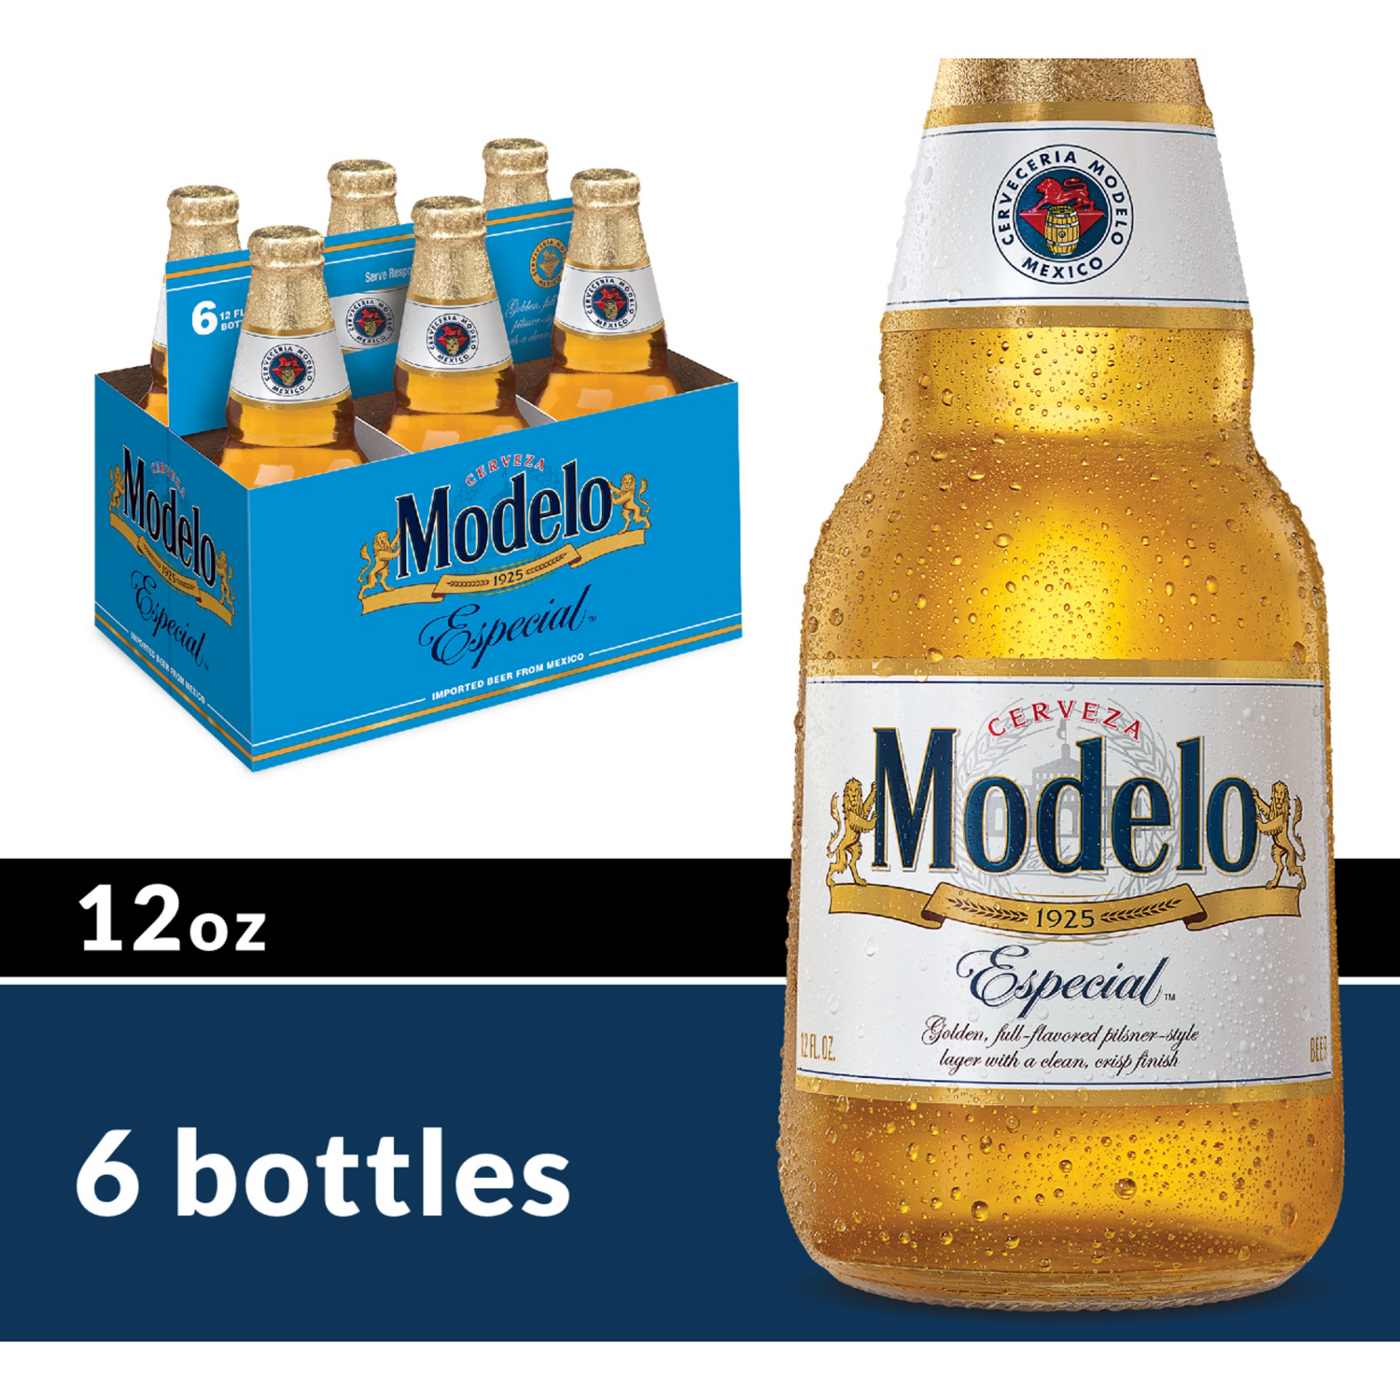 Modelo Especial Mexican Lager Import Beer 12 oz Bottles, 6 pk; image 4 of 10